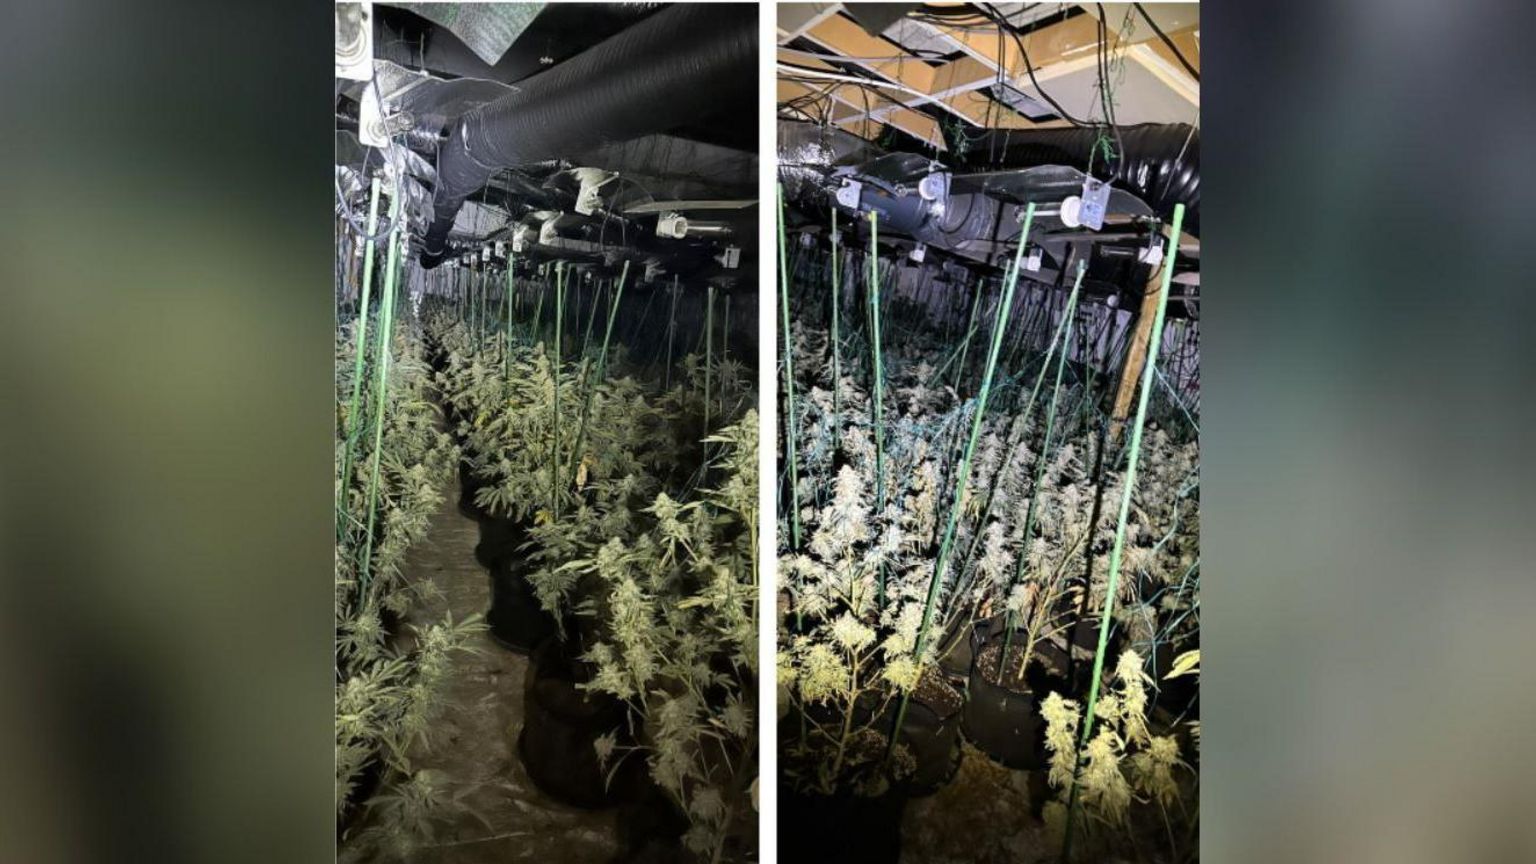 Thousands of cannabis plants found with equipment at this large-scale growing operation in Stockport 